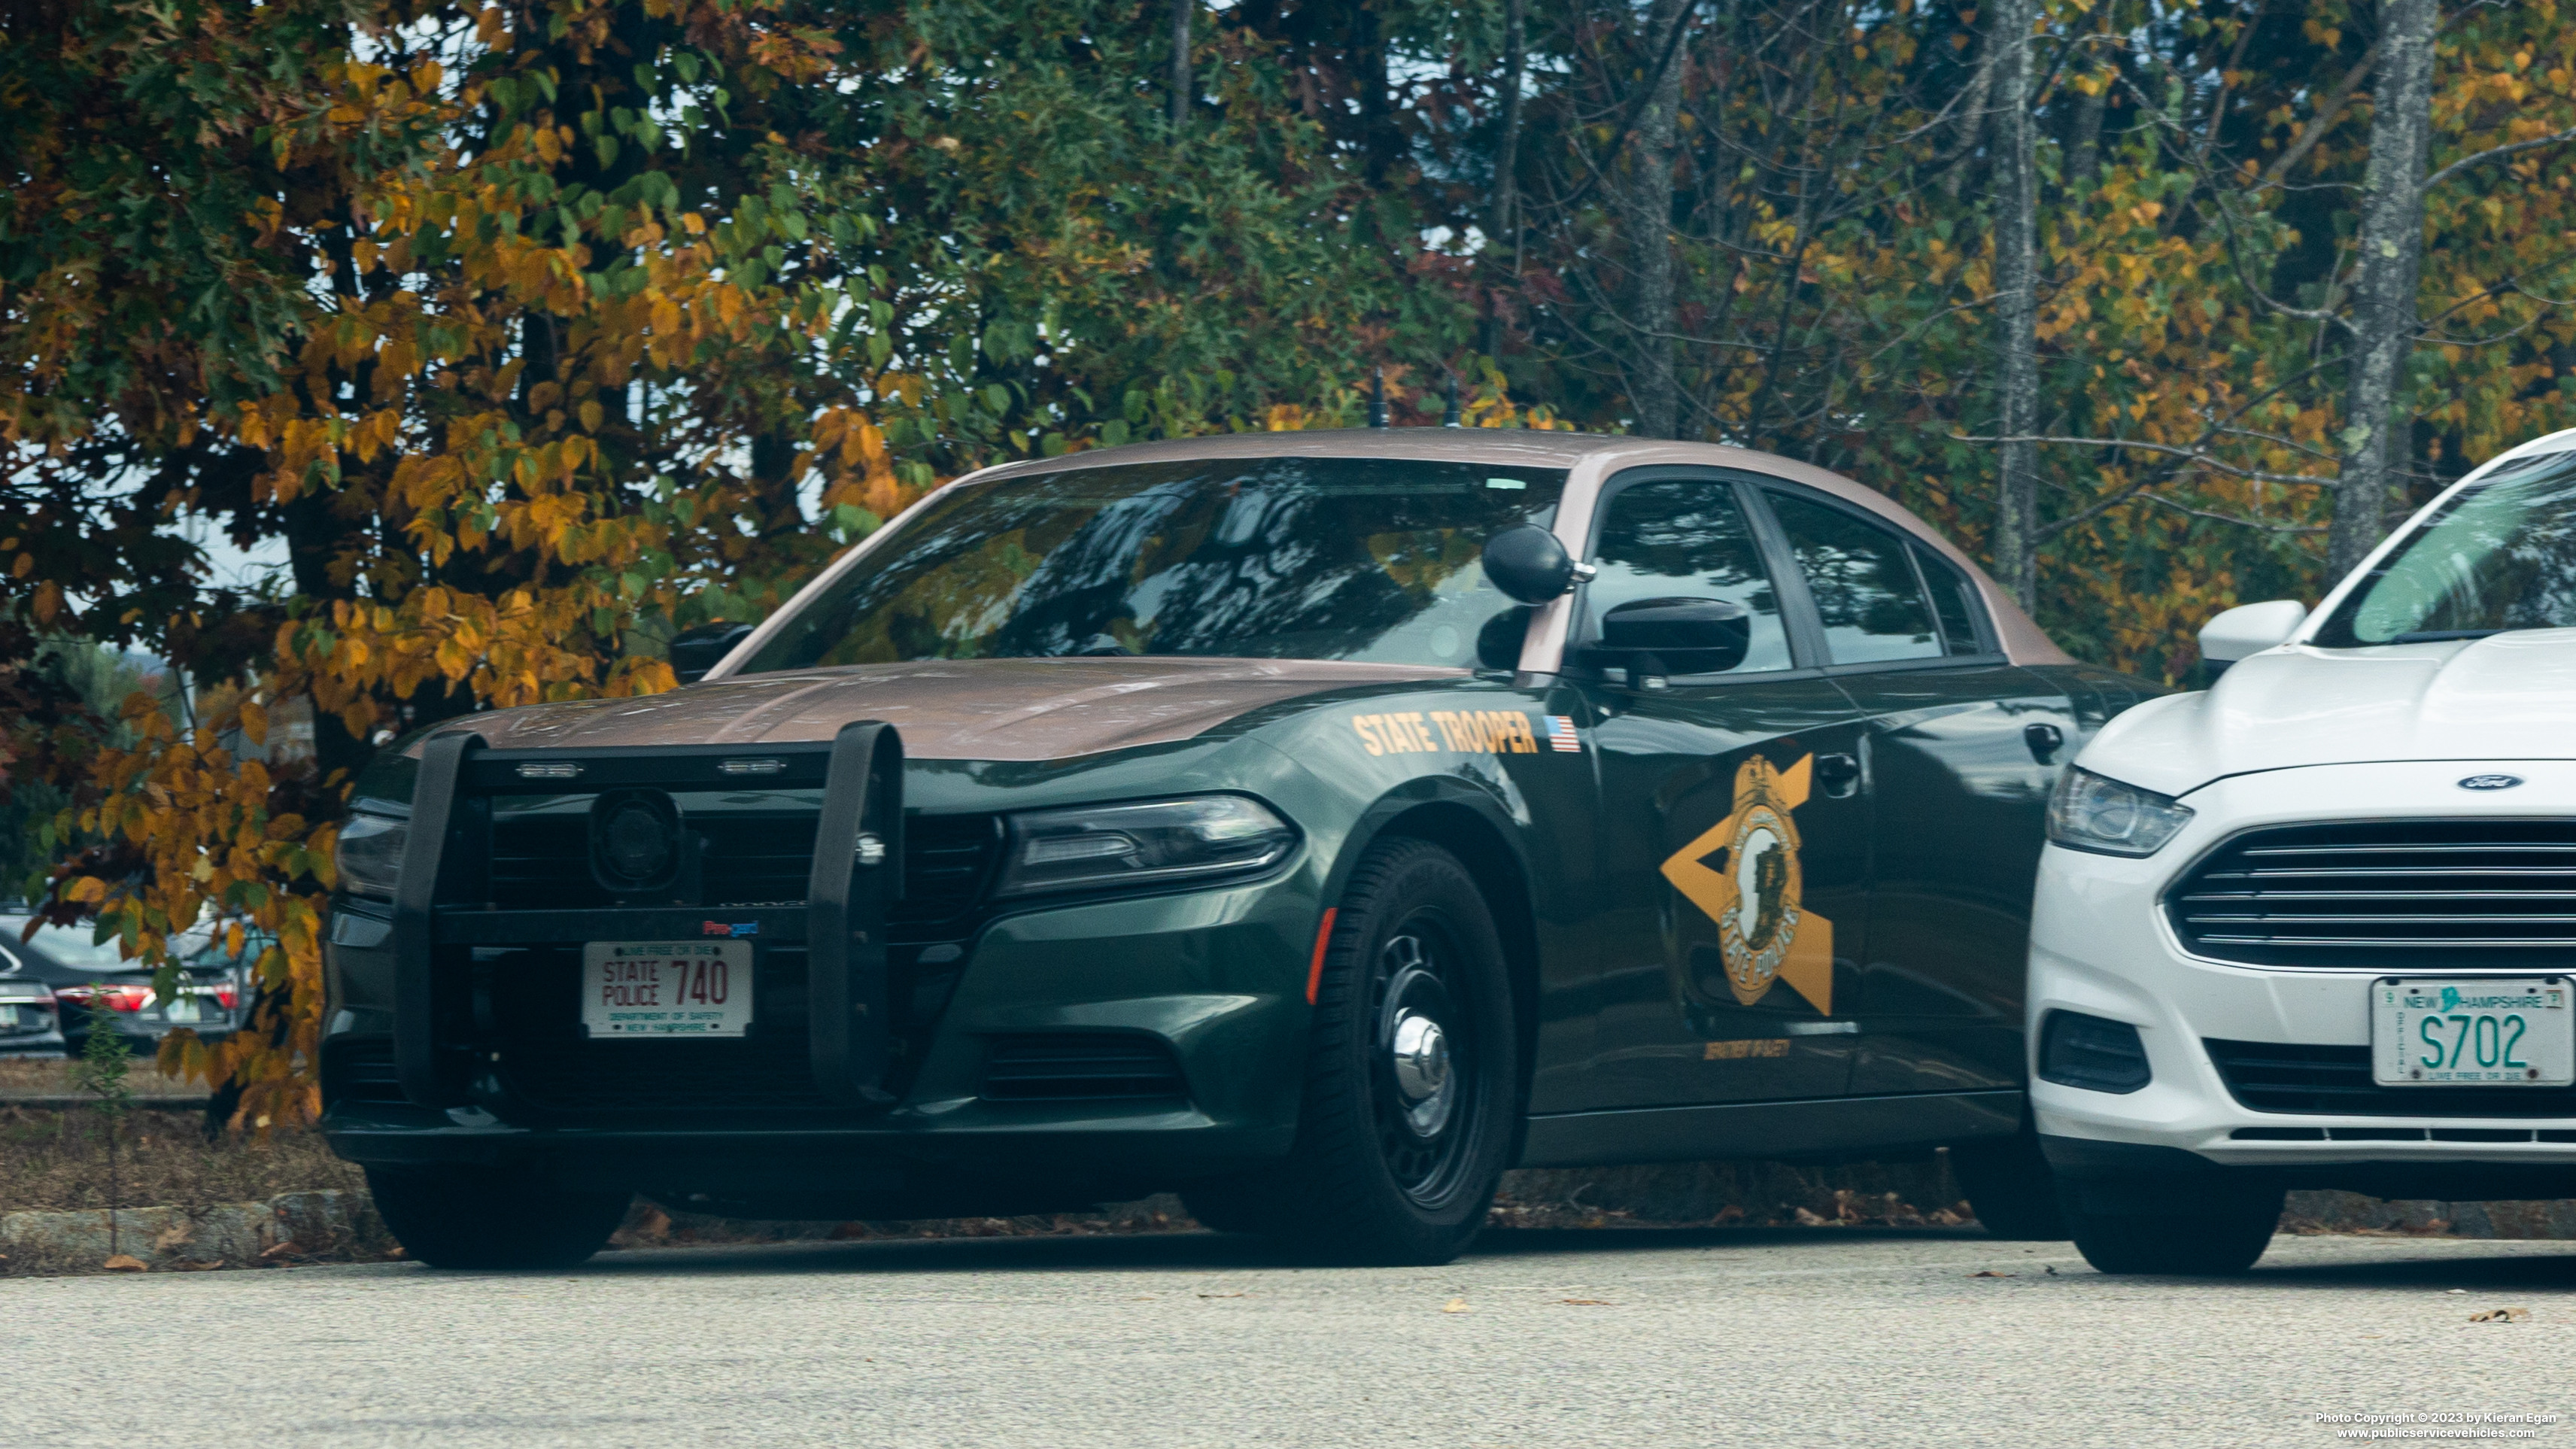 A photo  of New Hampshire State Police
            Cruiser 740, a 2015-2019 Dodge Charger             taken by Kieran Egan